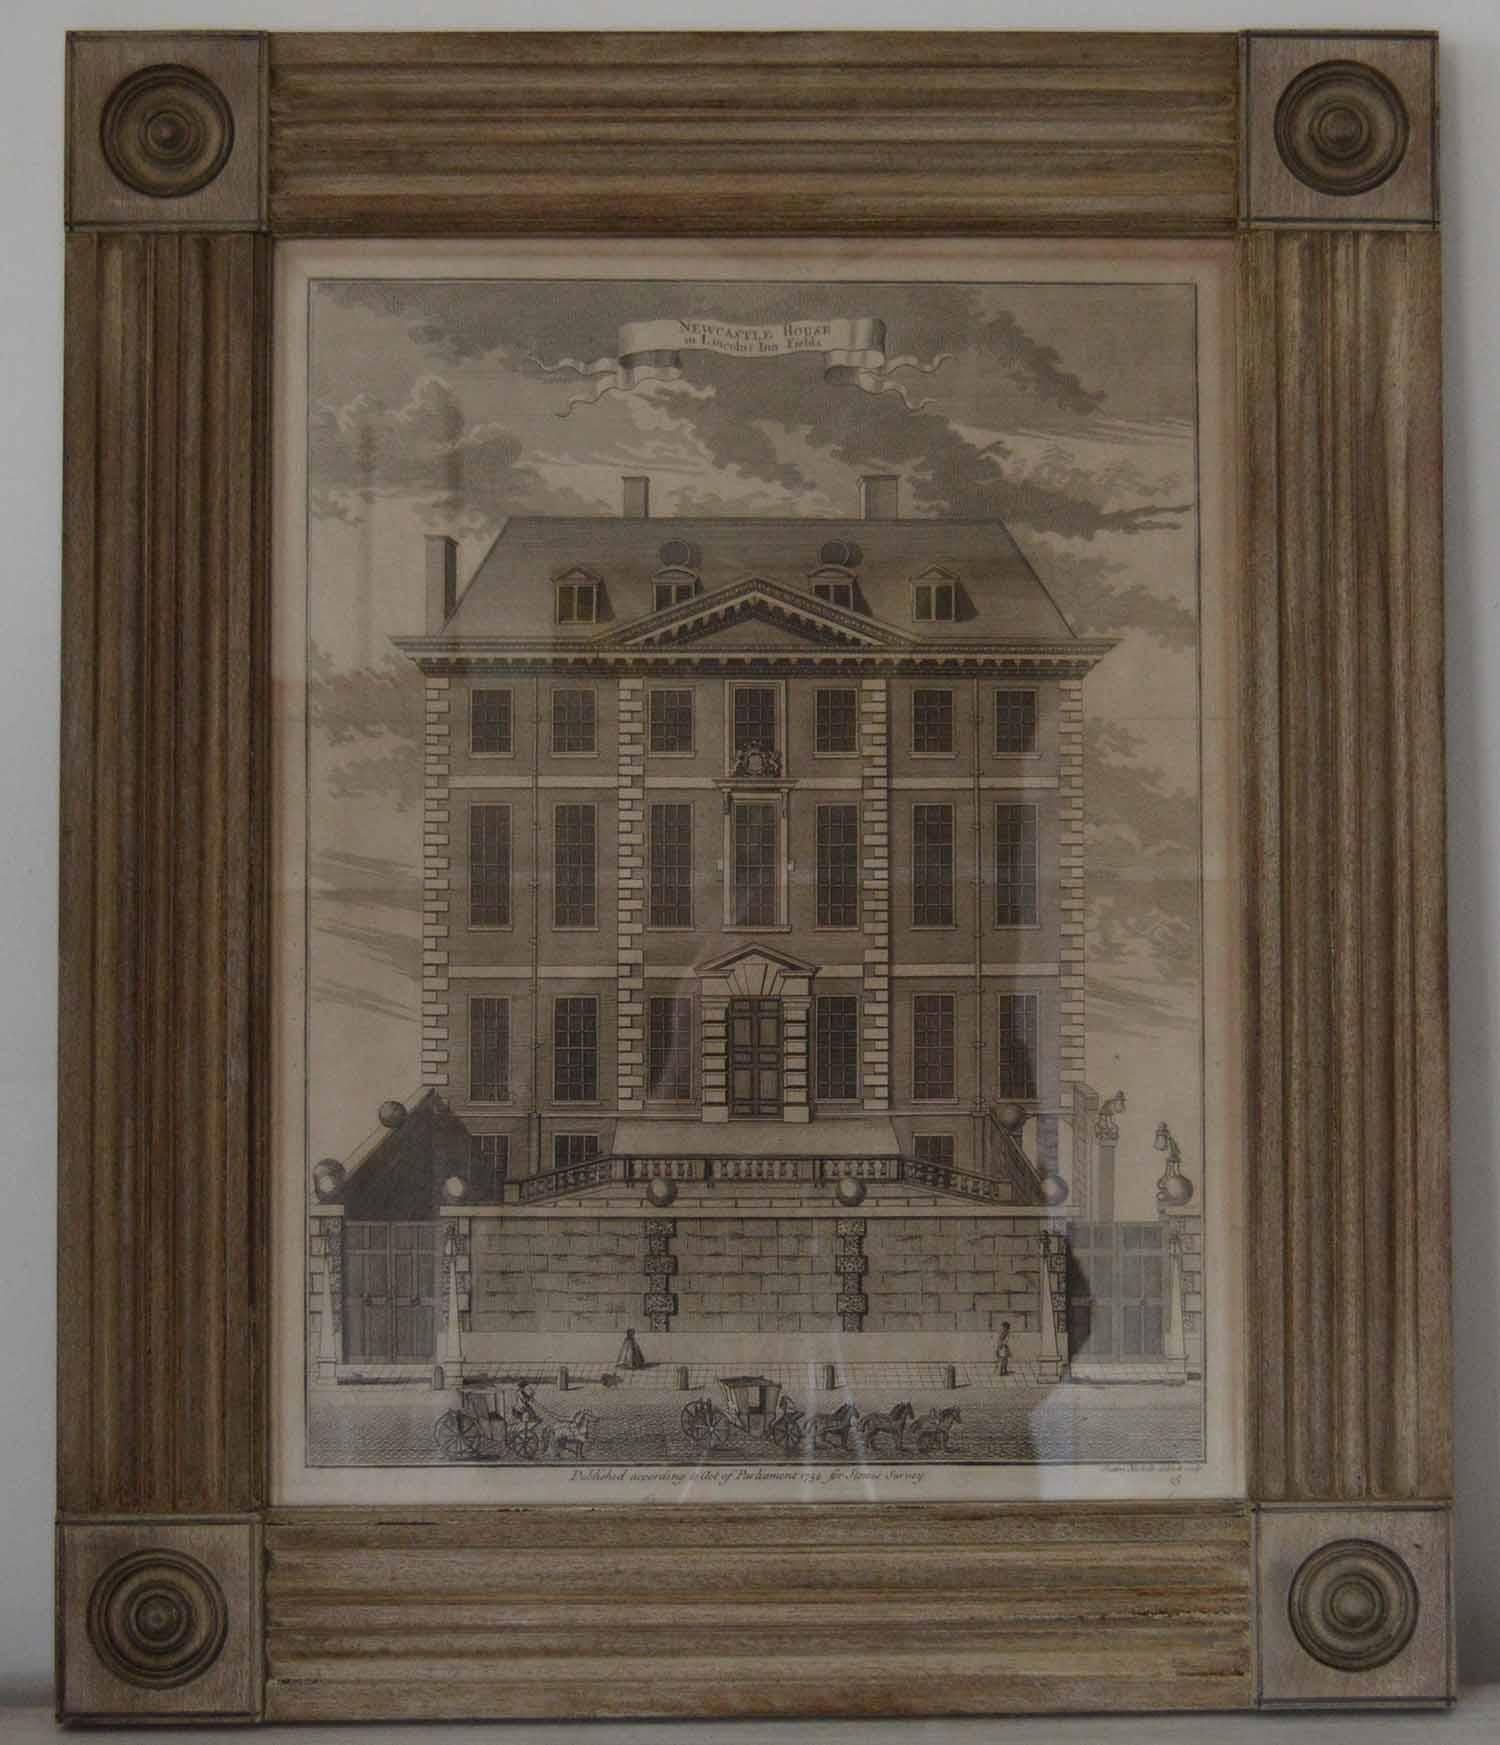 A wonderful copper-plate engraving of Newcastle House, Lincolns Inn Fields, London.

Drawn and engraved by Sutton Nicholls

Published, 1754

Presented in a fabulous antique bleached tropical hardwood frame.






